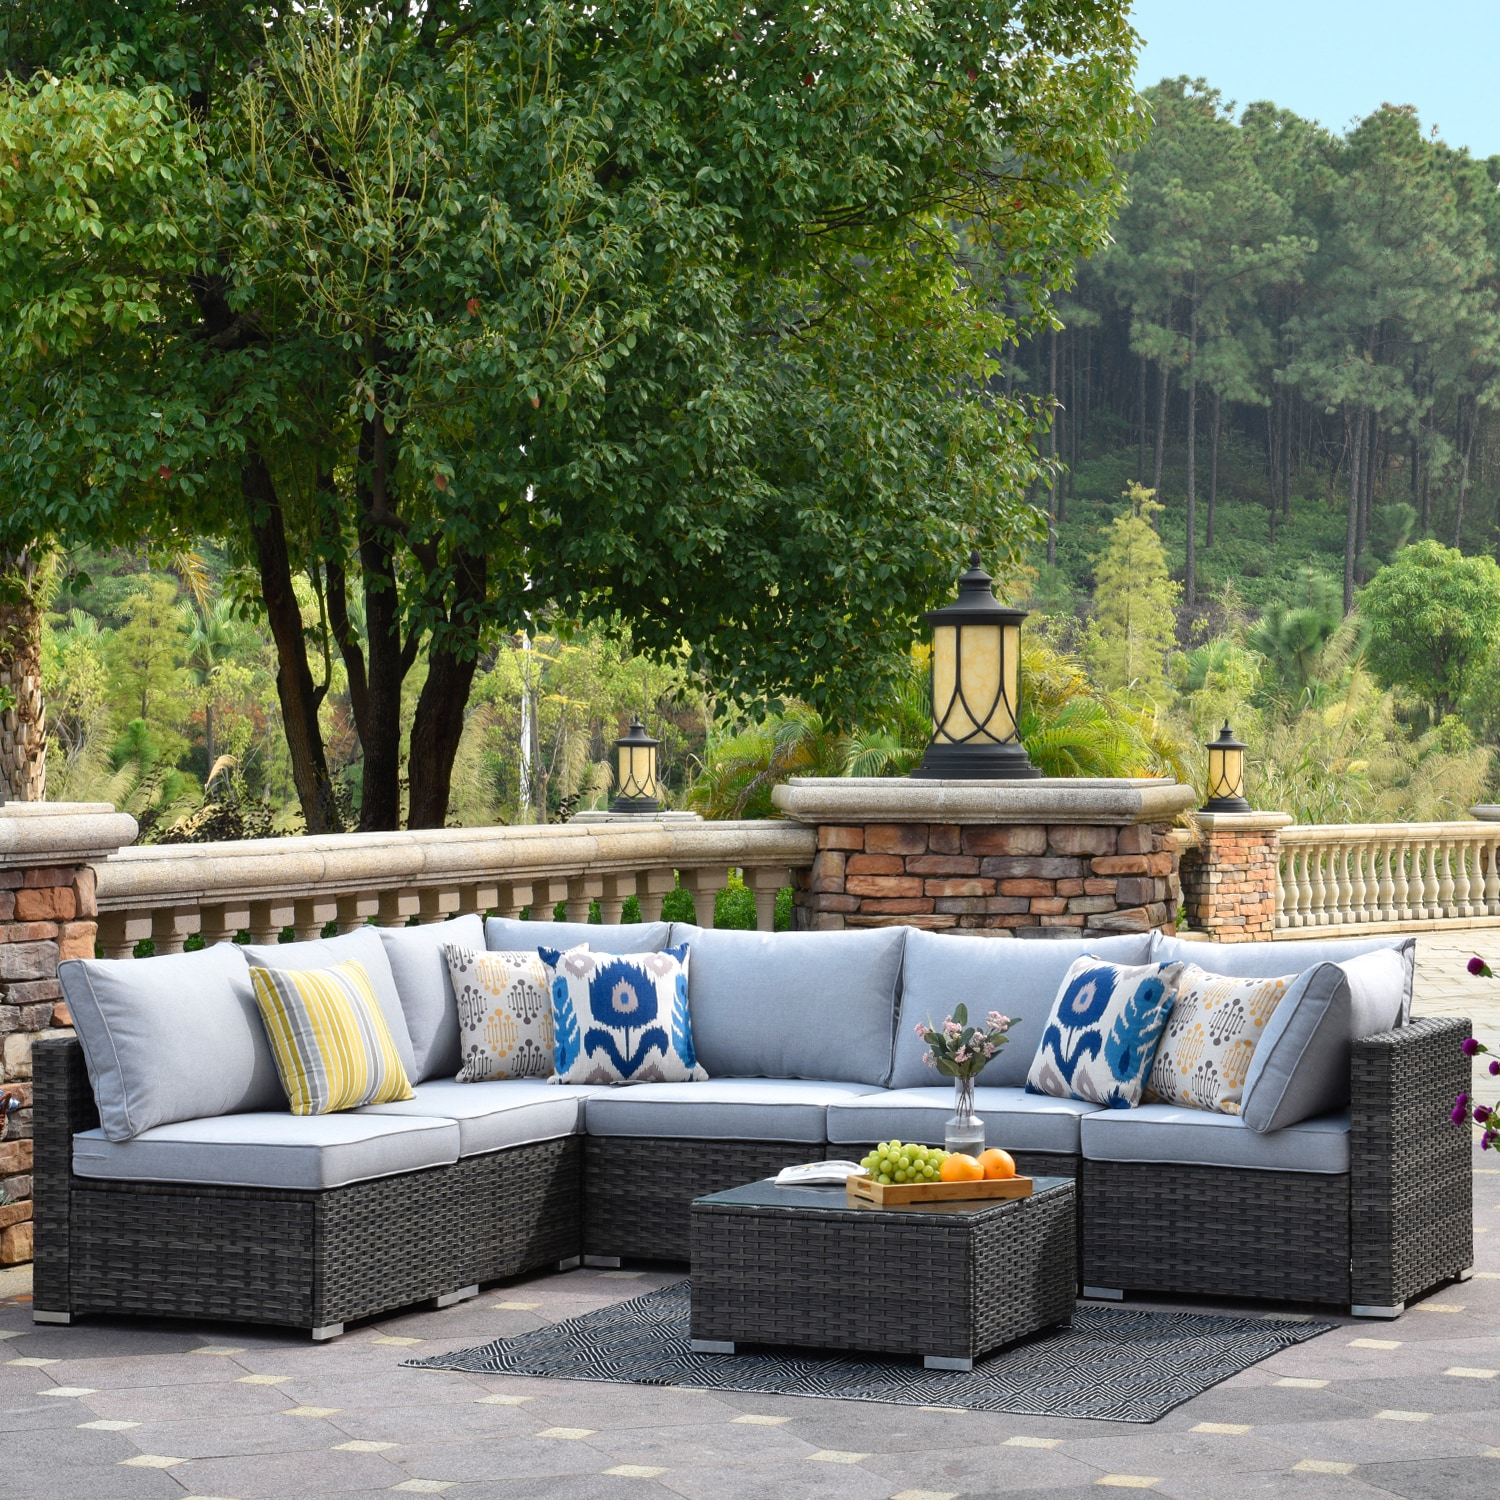 xizzi sunrise rattan outdoor sectional with gray cushion(s) and steel frame